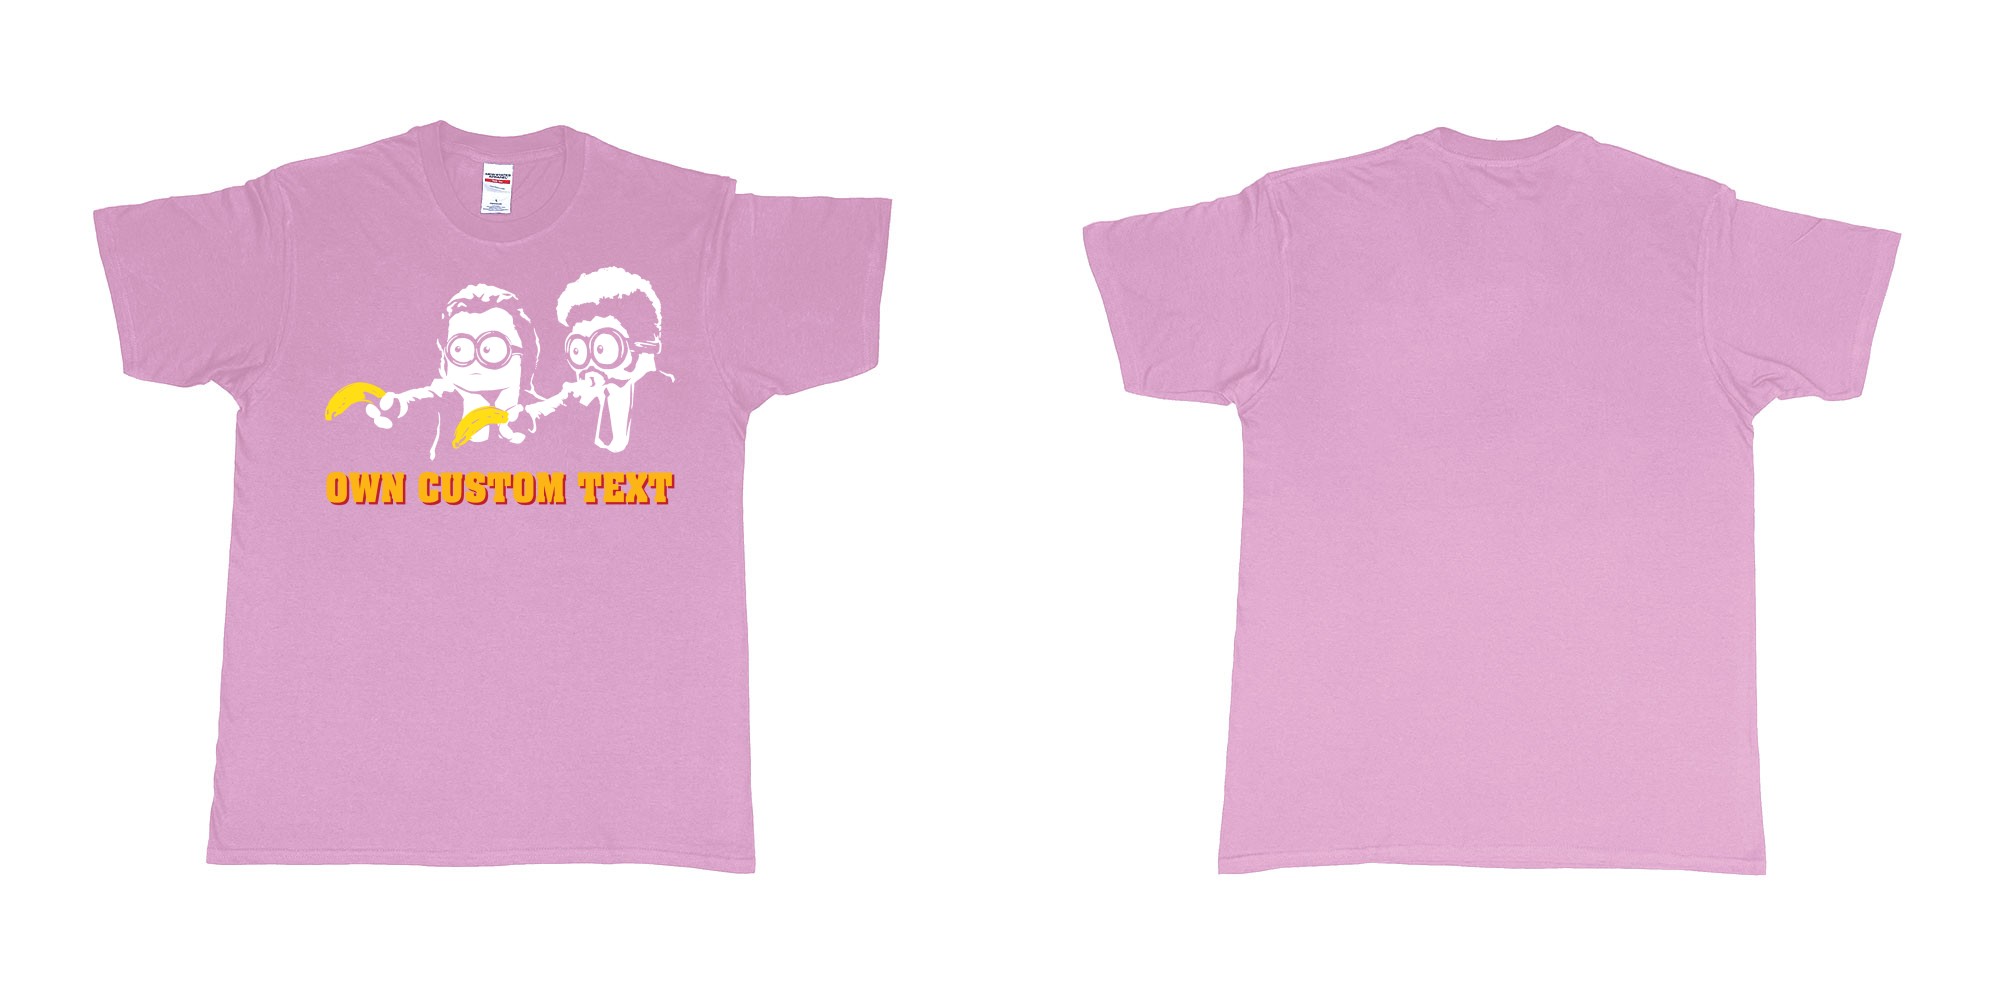 Custom tshirt design minions pulp fiction in fabric color light-pink choice your own text made in Bali by The Pirate Way